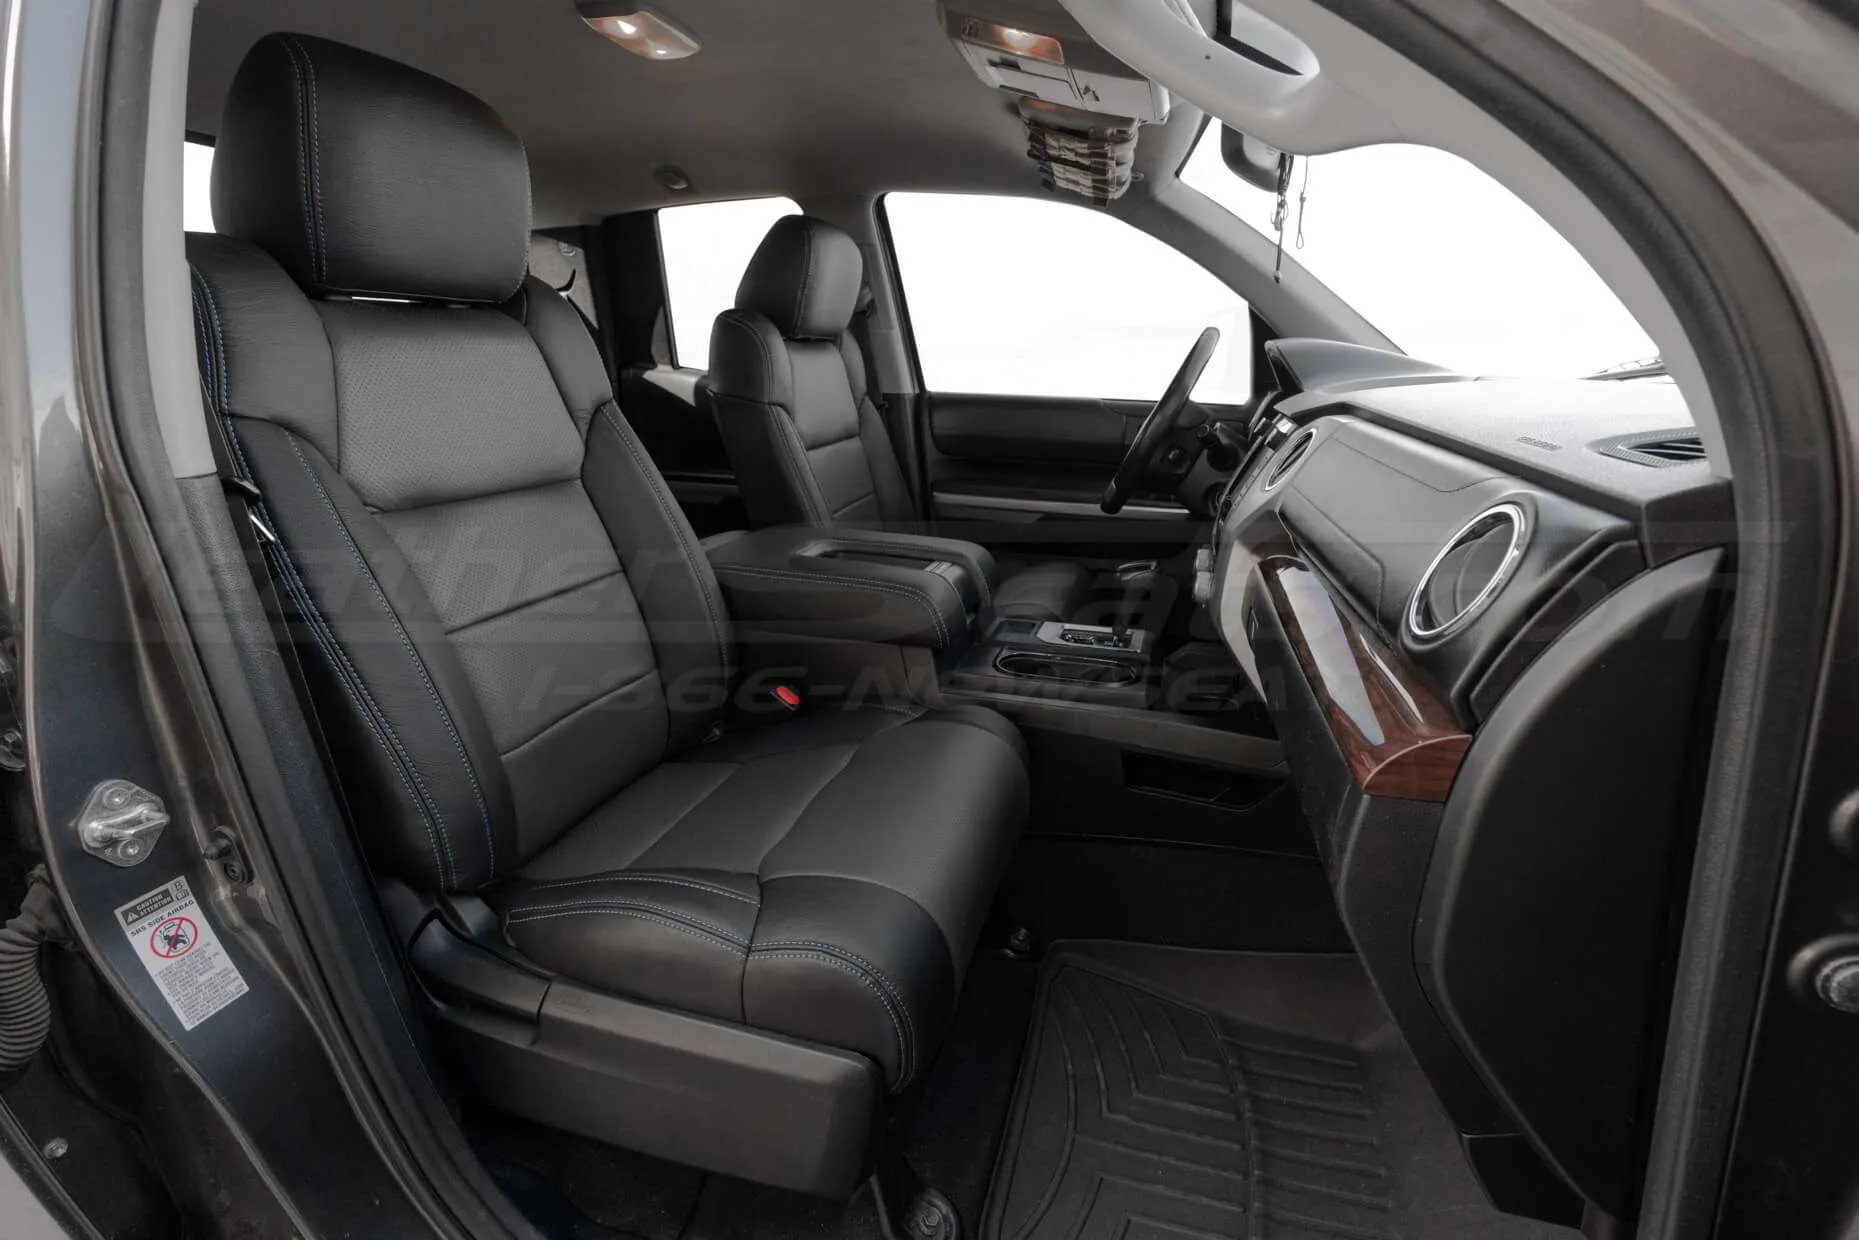 Passenger Toyota Tundra double cab with installed two-tone leather seats